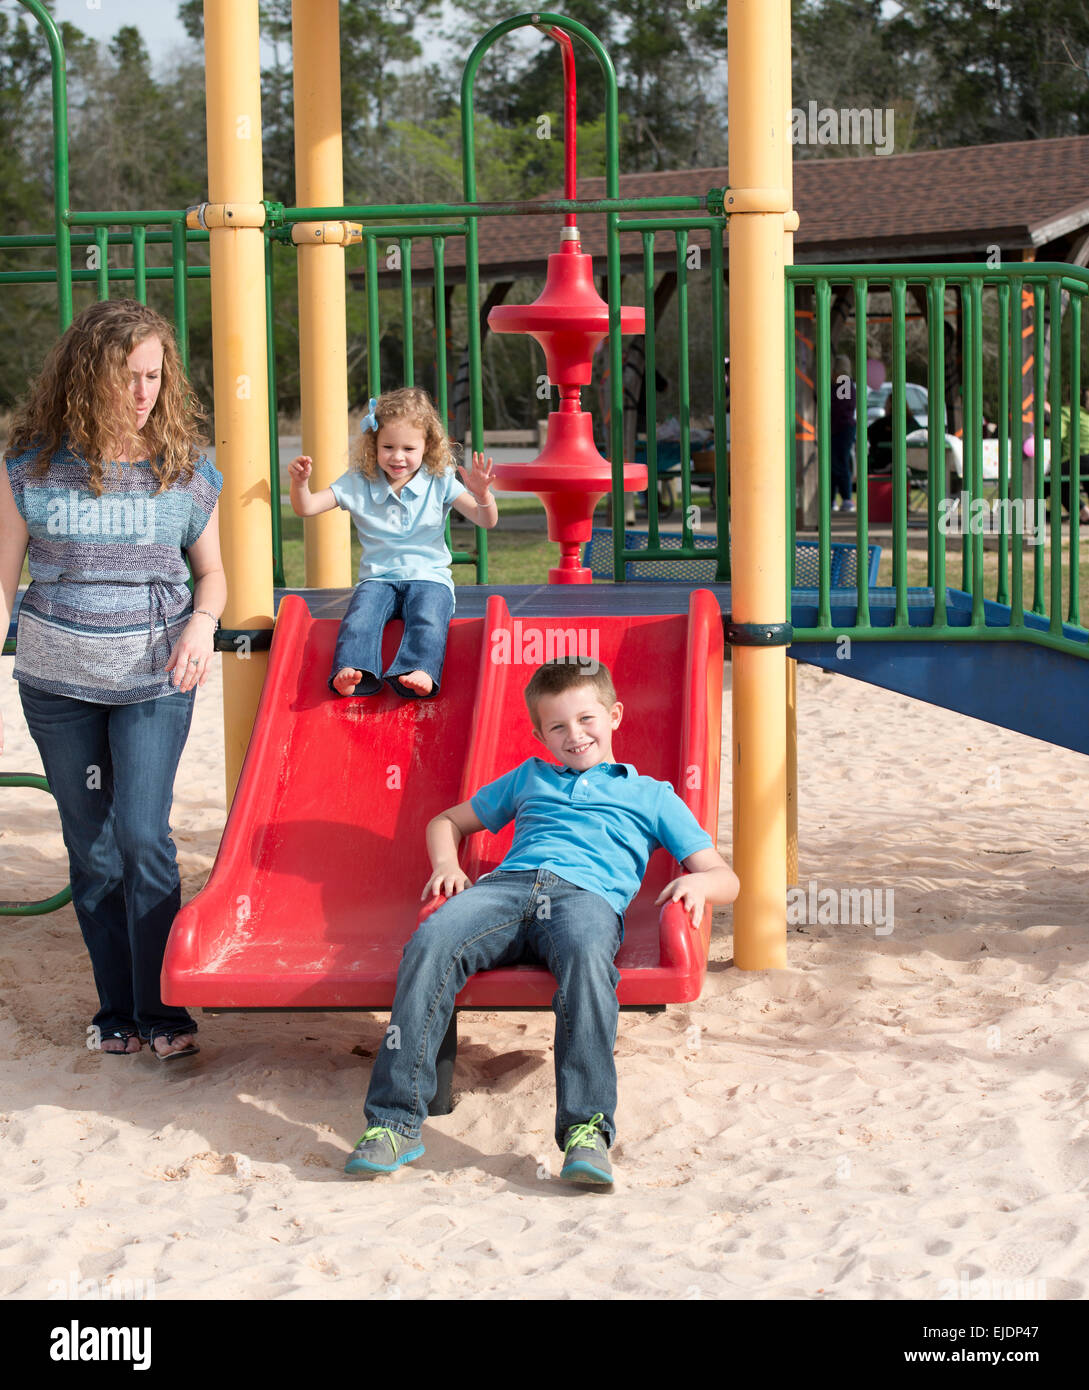 Young boy and girl go down slide on park playground while Mom looks on Stock Photo